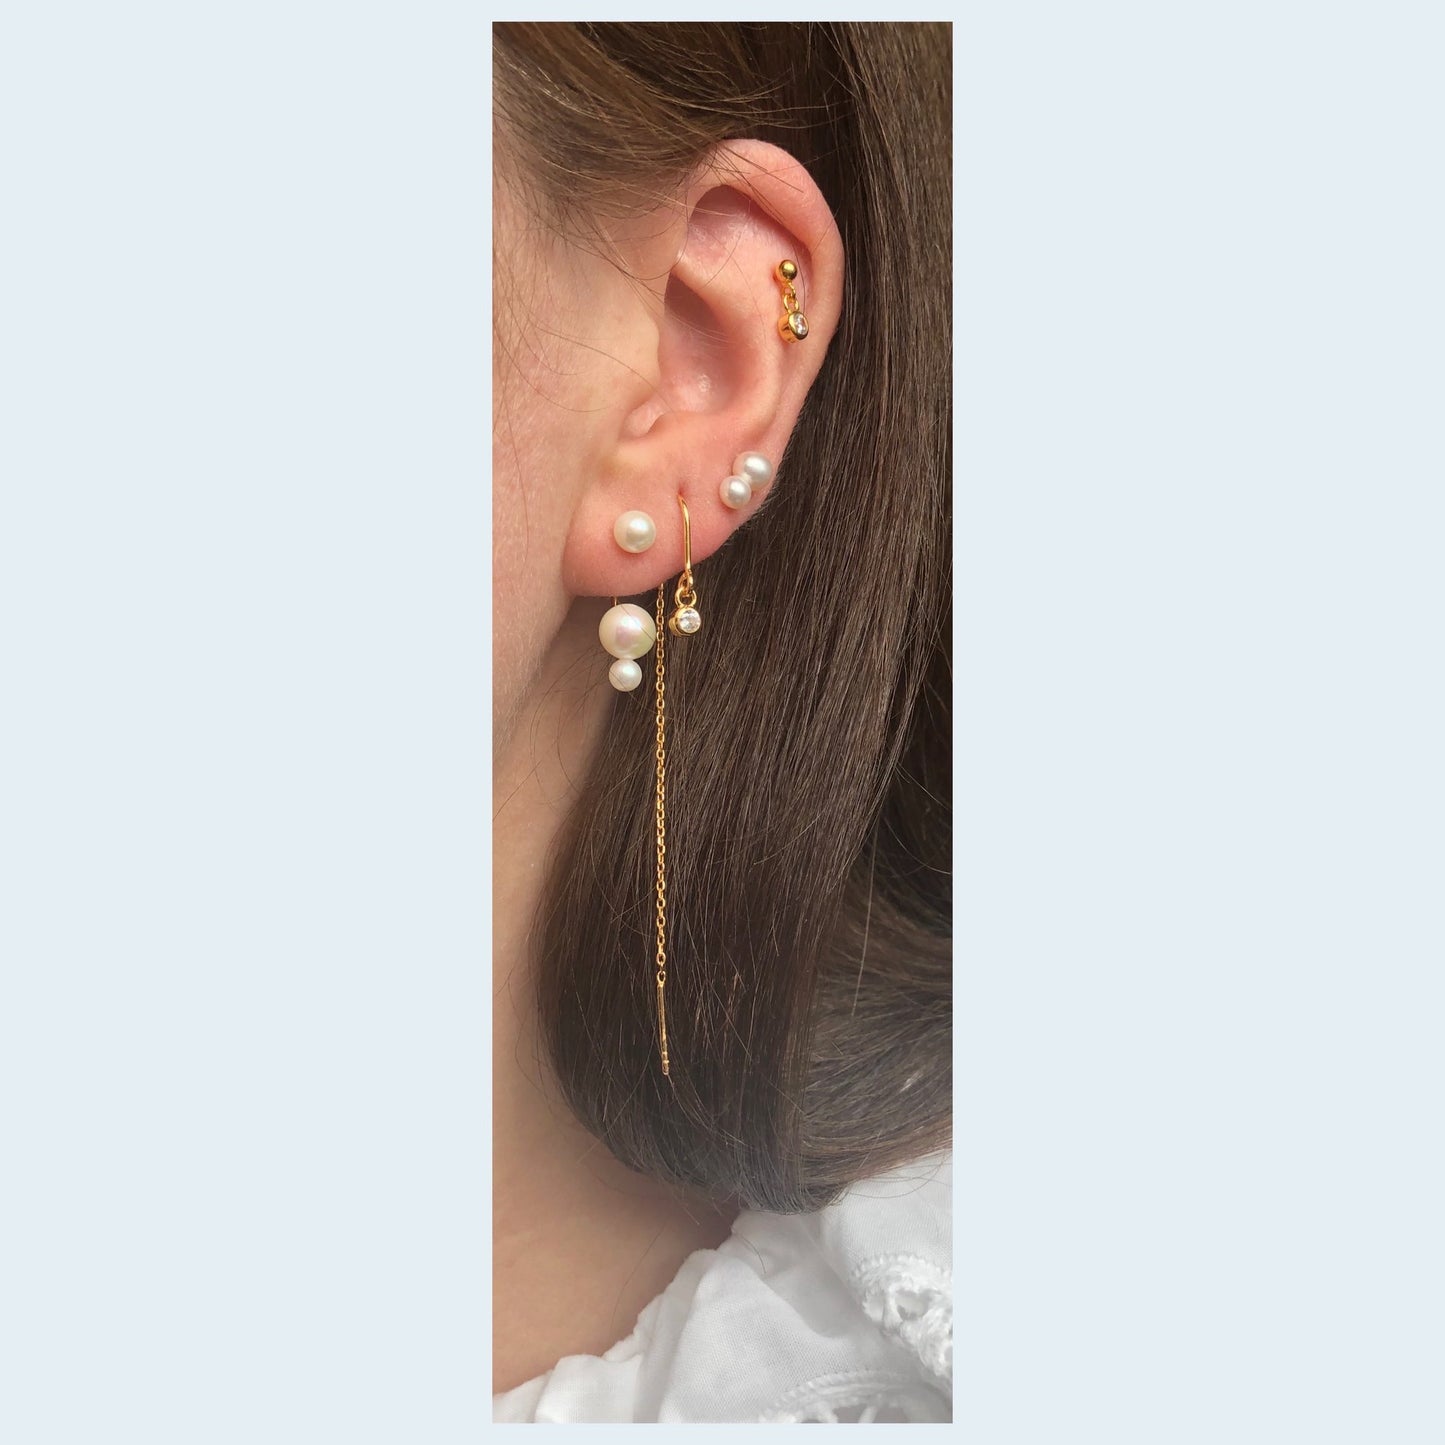 Sway Stud Earring -  Gold Plated Silver  Freshwater Pearls